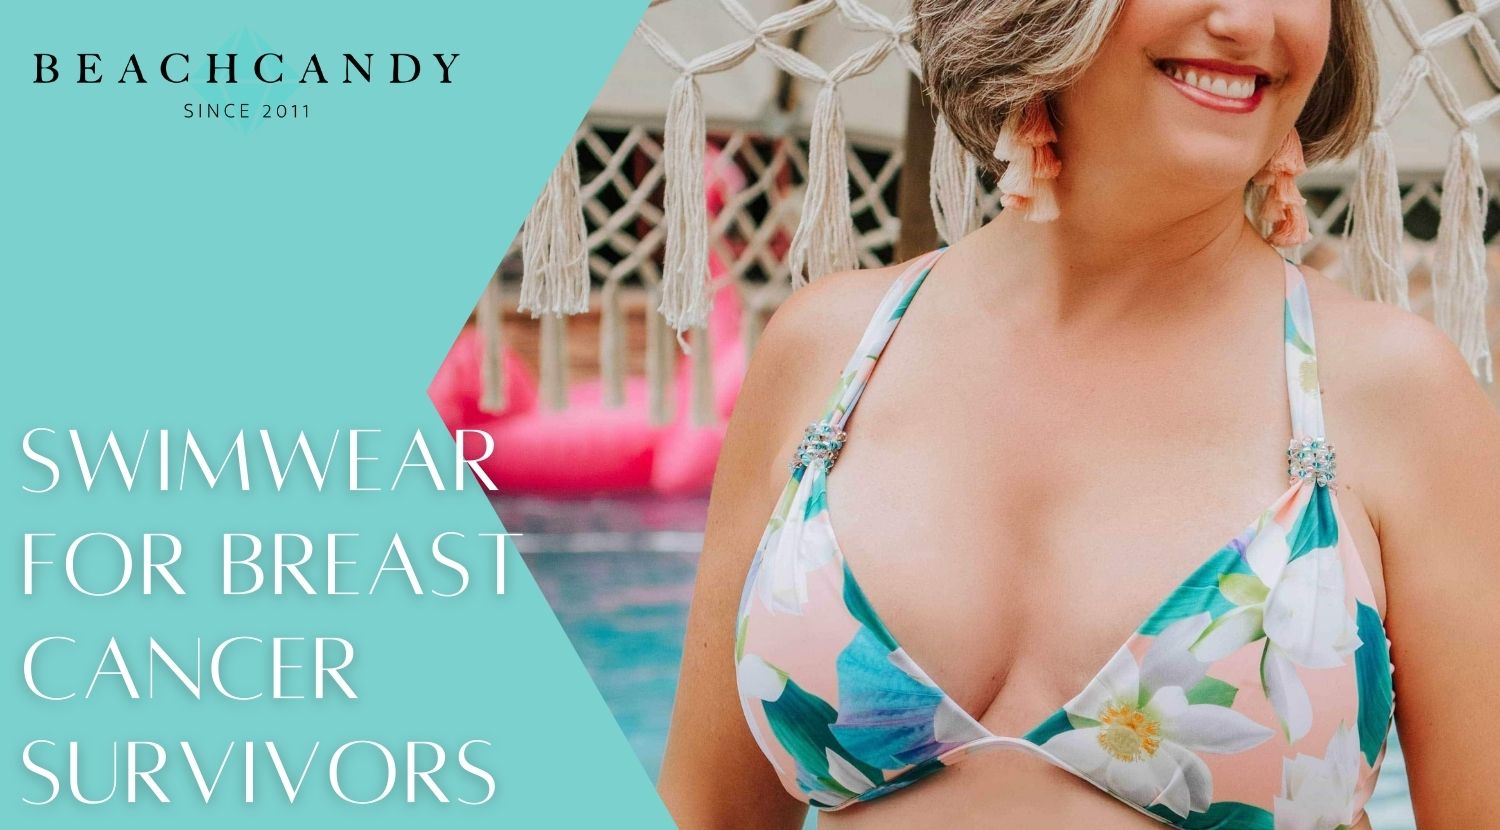 6 NEW SWIMWEAR BRANDS TO TRY POST BREAST CANCER SURGERY - Rethink